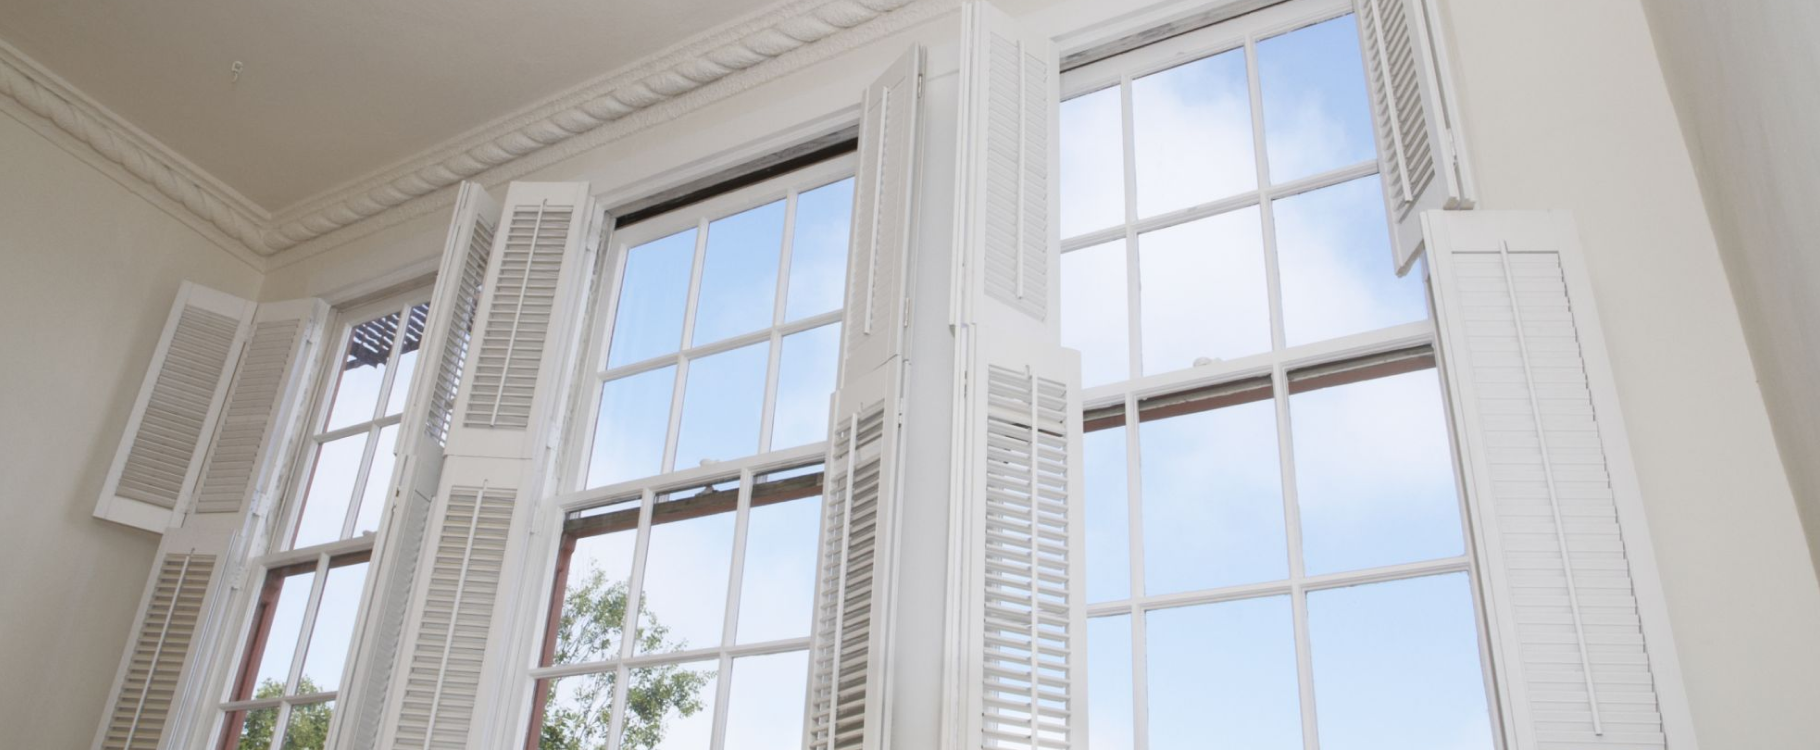 Which plantation shutters are the best?